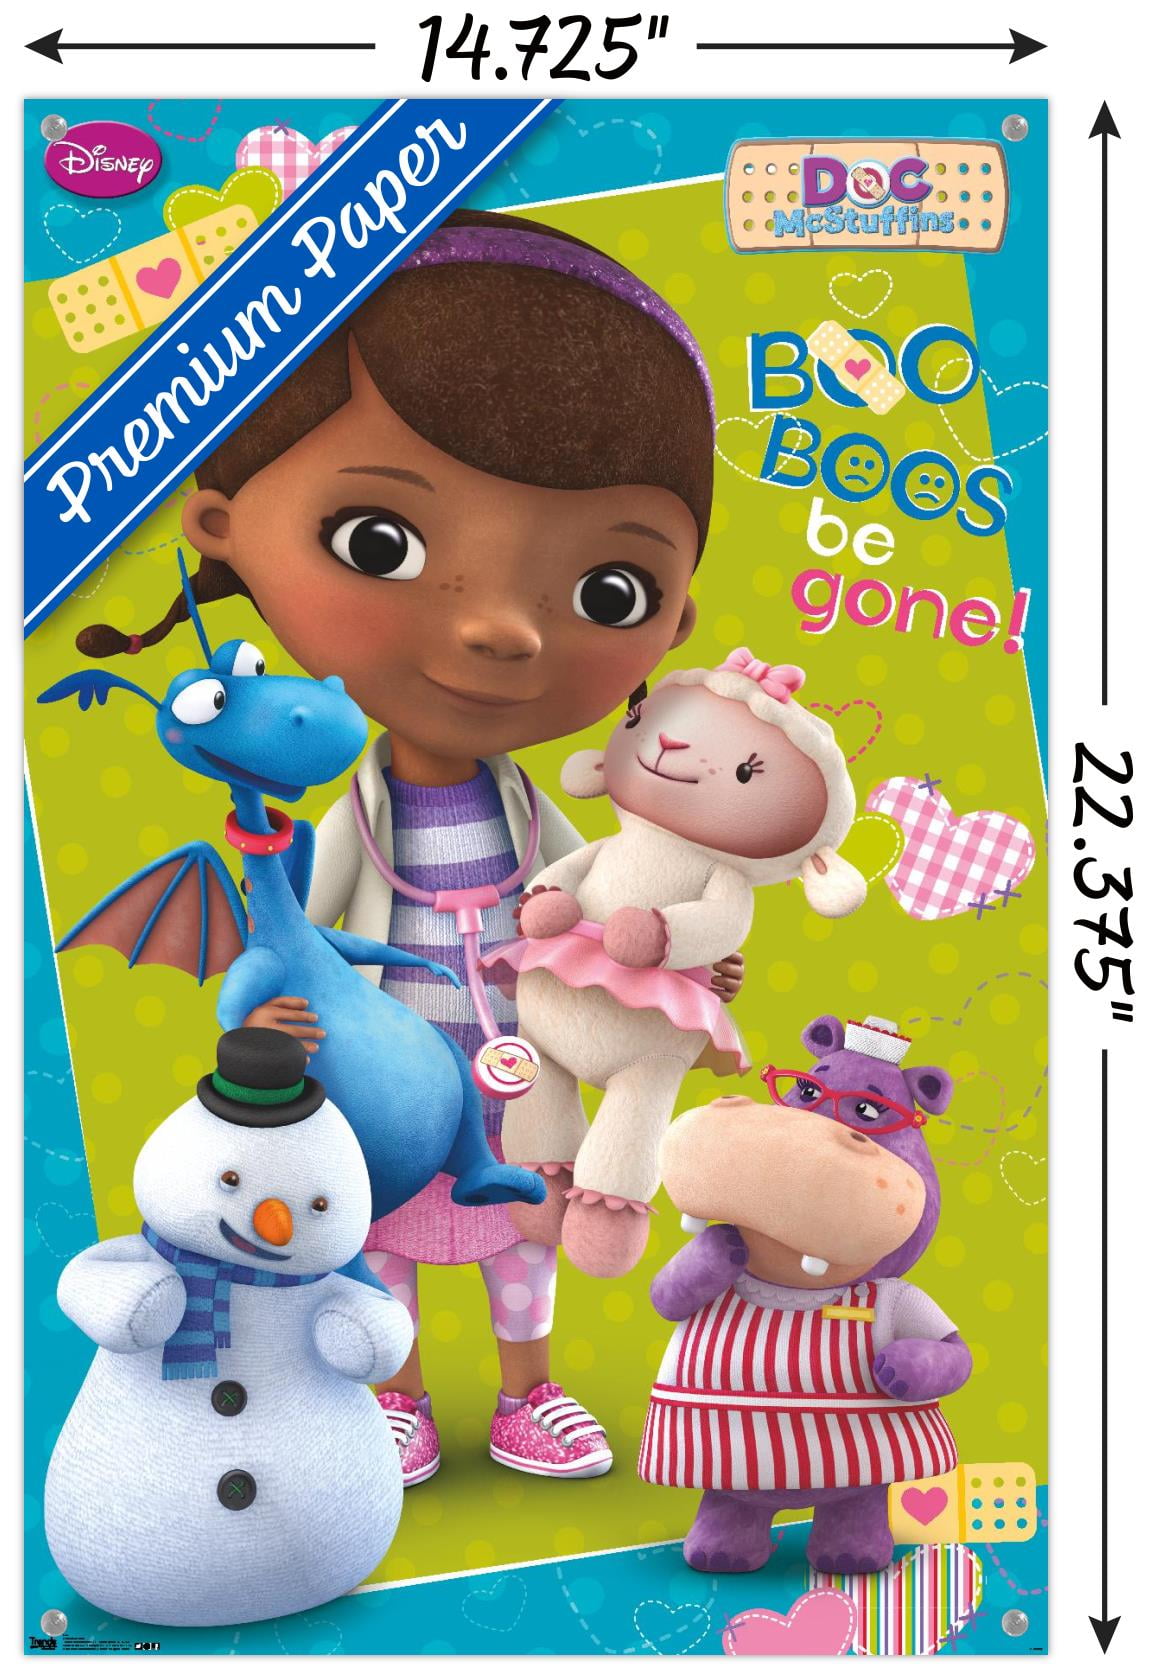 Boo Boos Be Gone Activities Book Doc McStuffins 